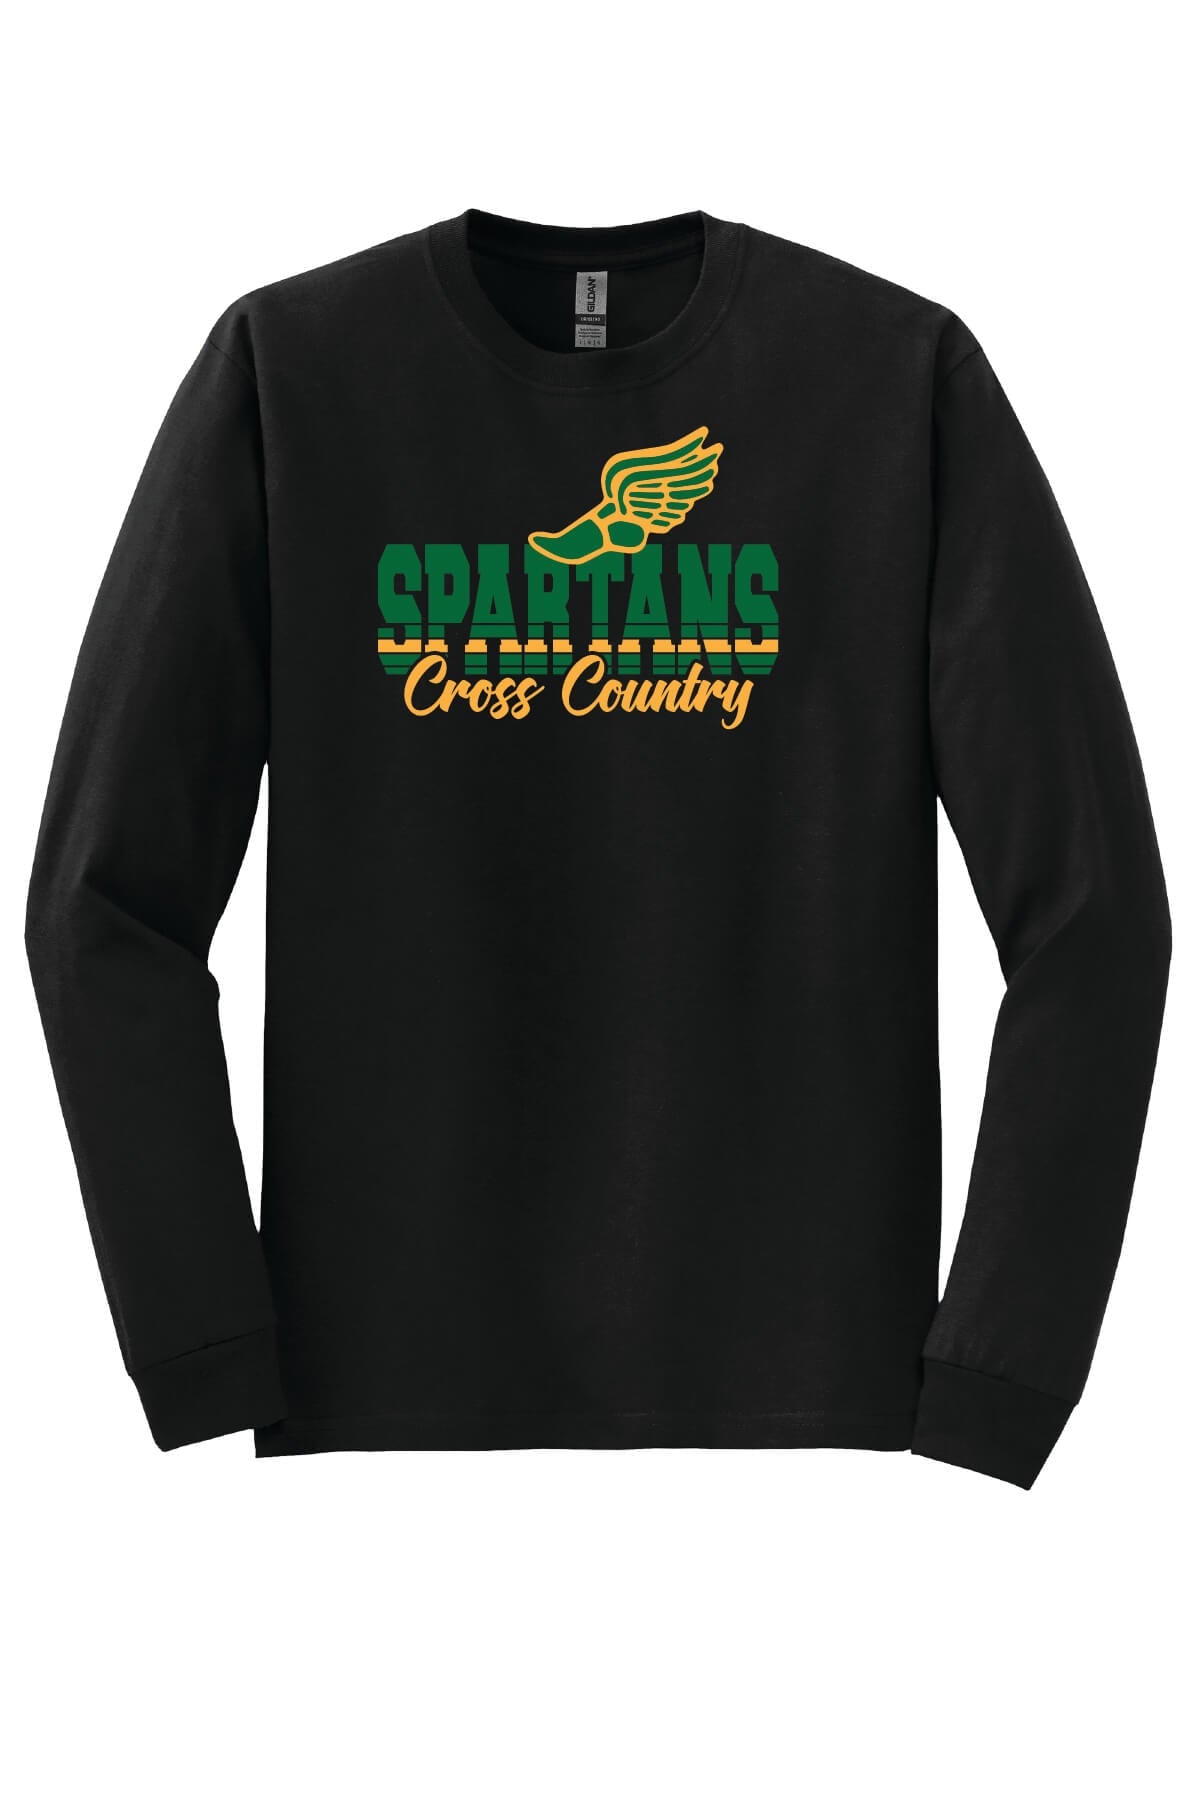 Spartans Cross Country Long Sleeve T-Shirt black